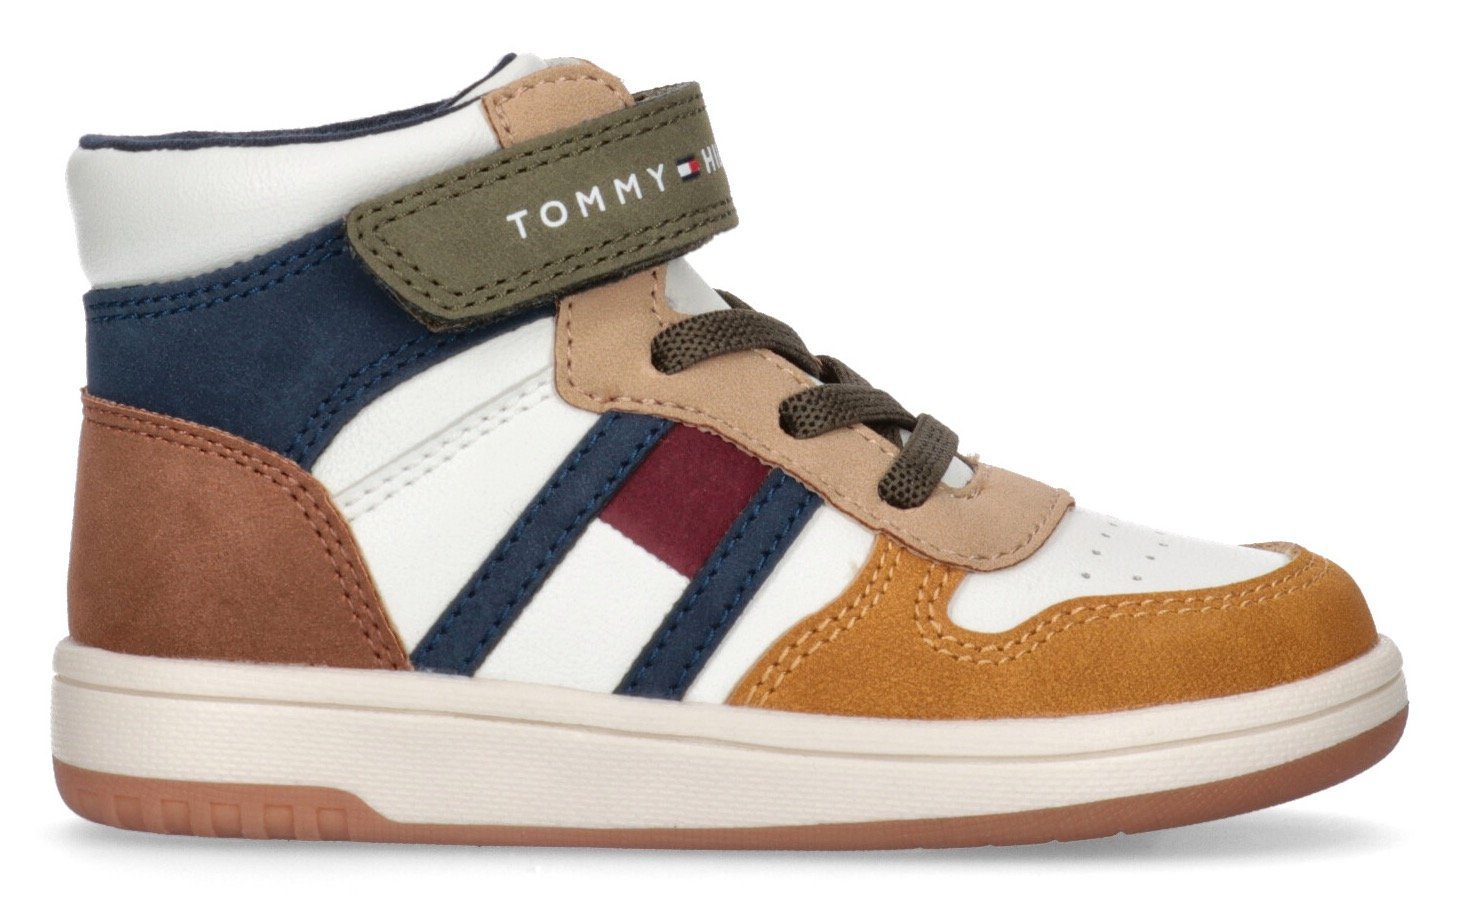 Tommy Hilfiger FLAG HIGH TOP modischen colorblocking Look Sneaker im LACE-UP/VELCRO SNEAKER